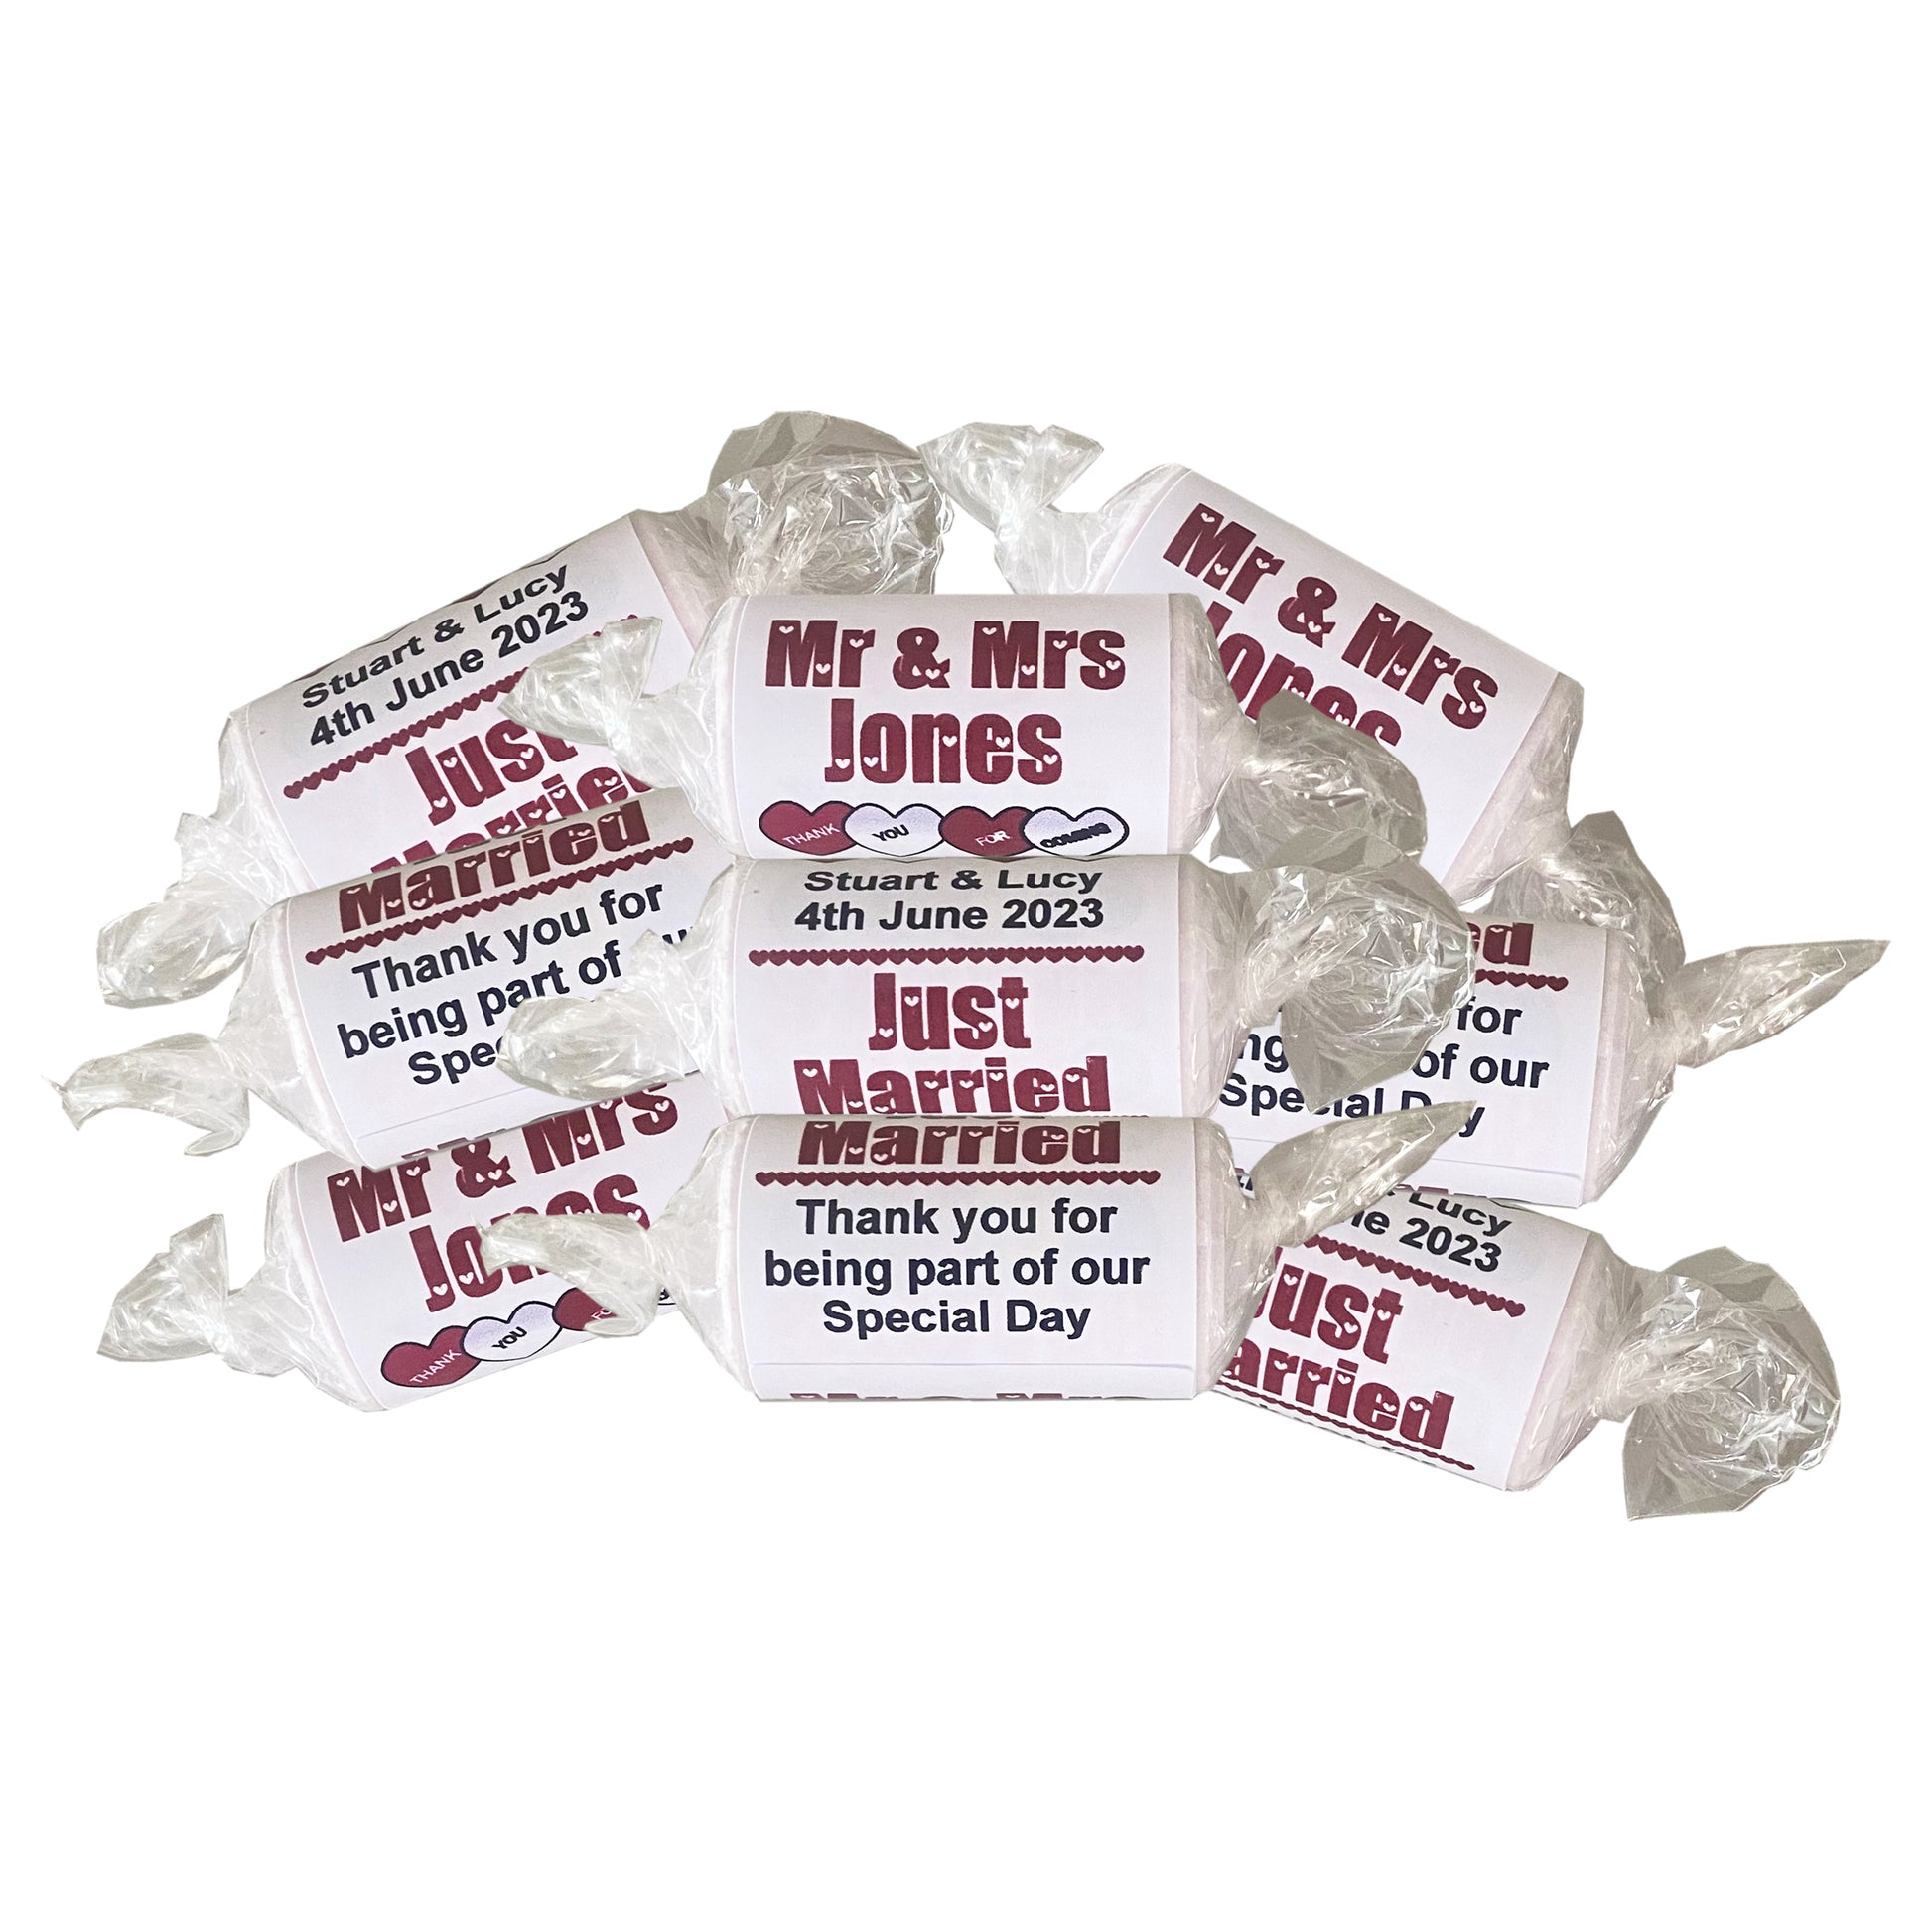 Burgundy wedding favours personalised love heart sweets